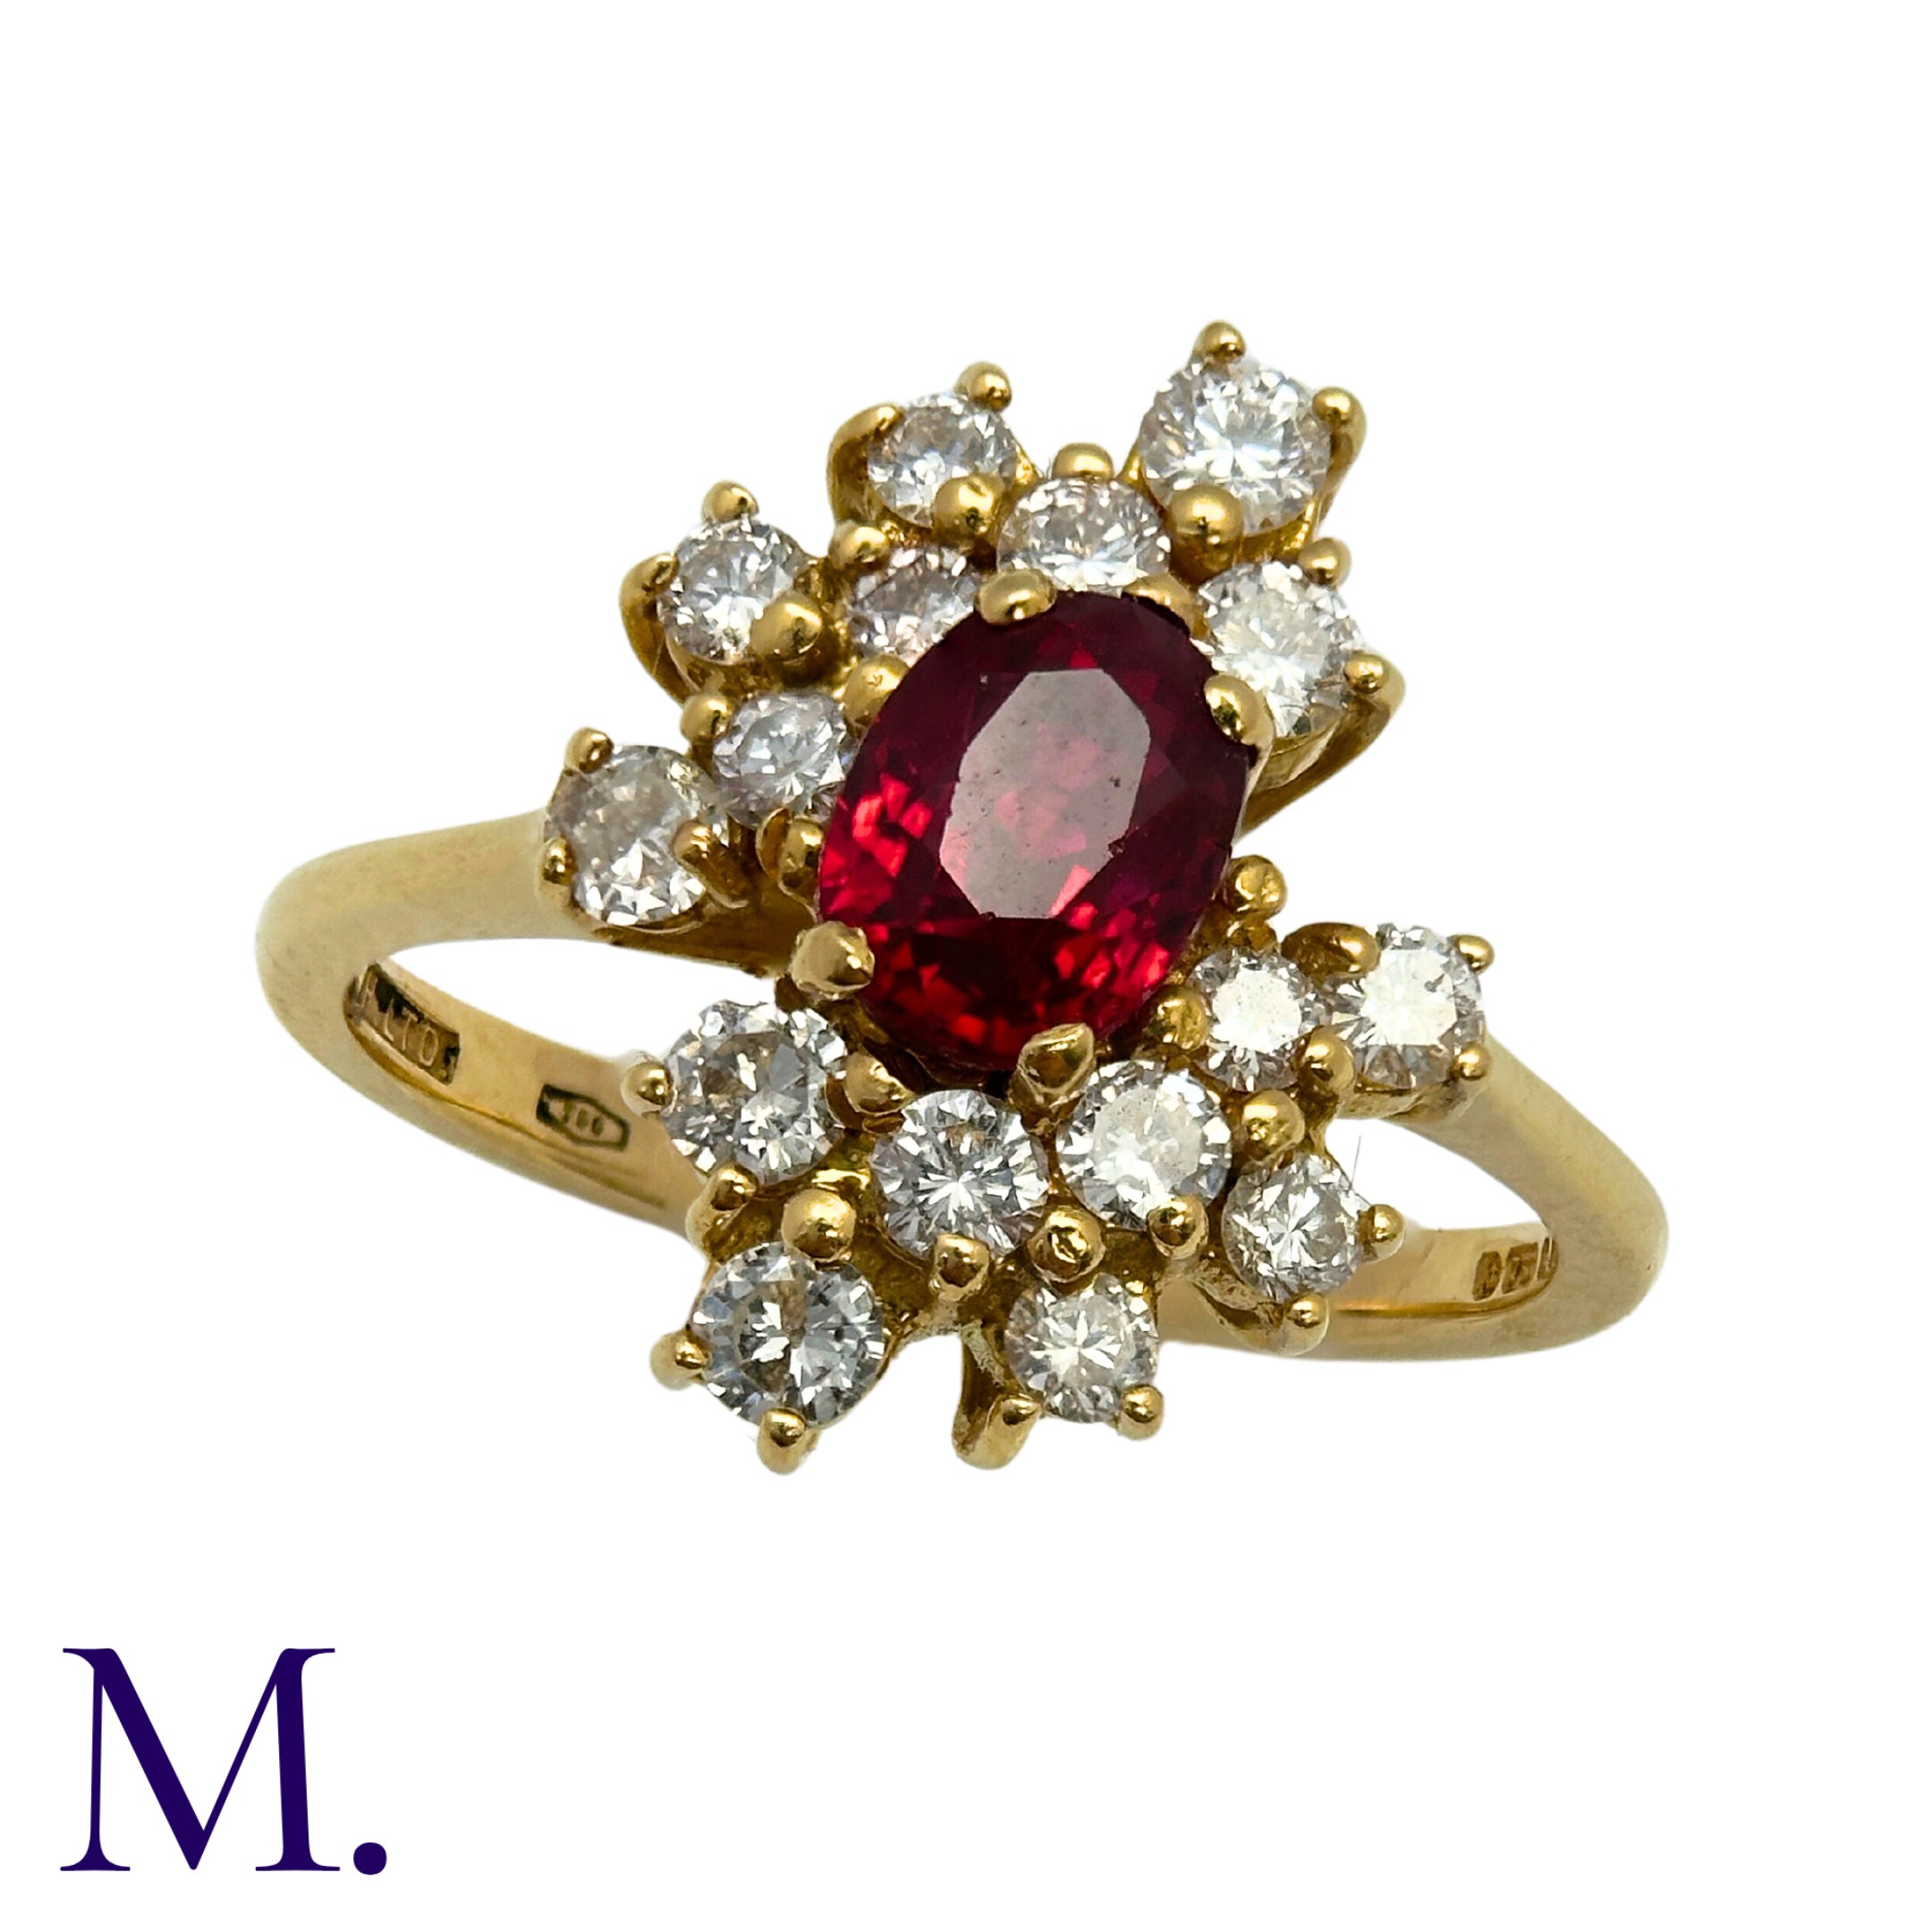 A Ruby and Diamond Ring in 18K yellow gold, set with an oval cut ruby of approximately 0.60ct to the - Image 3 of 3